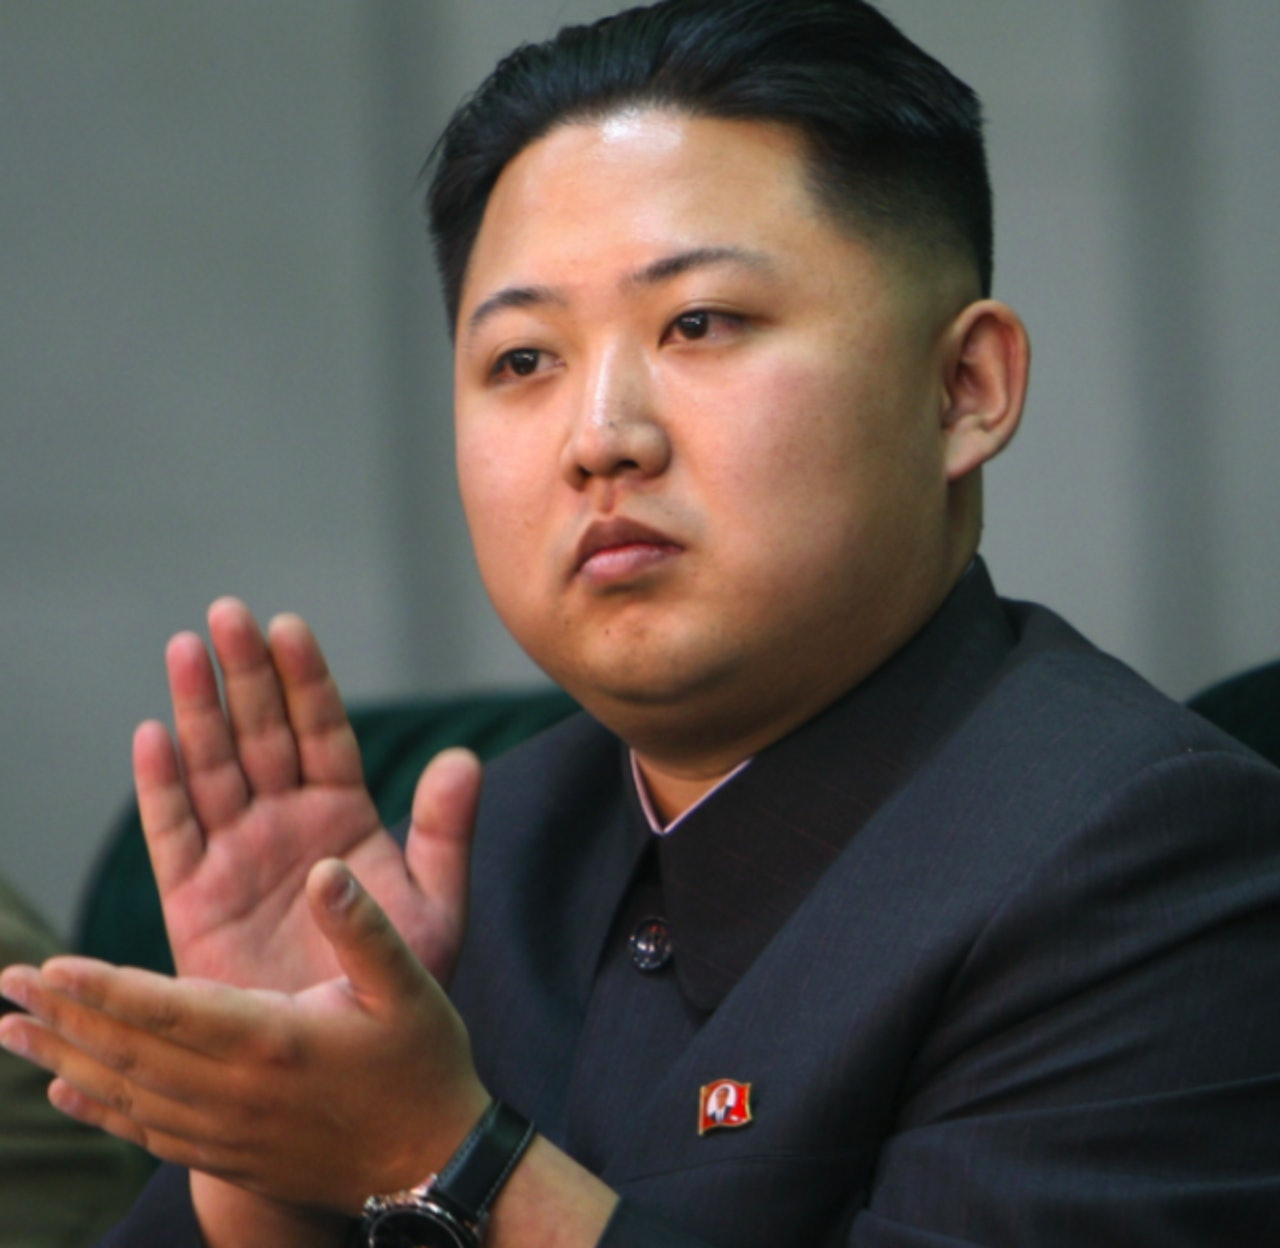 CRAPPY MOVE: Kim Jong Un is bringing his own toilet to the Koreas ...